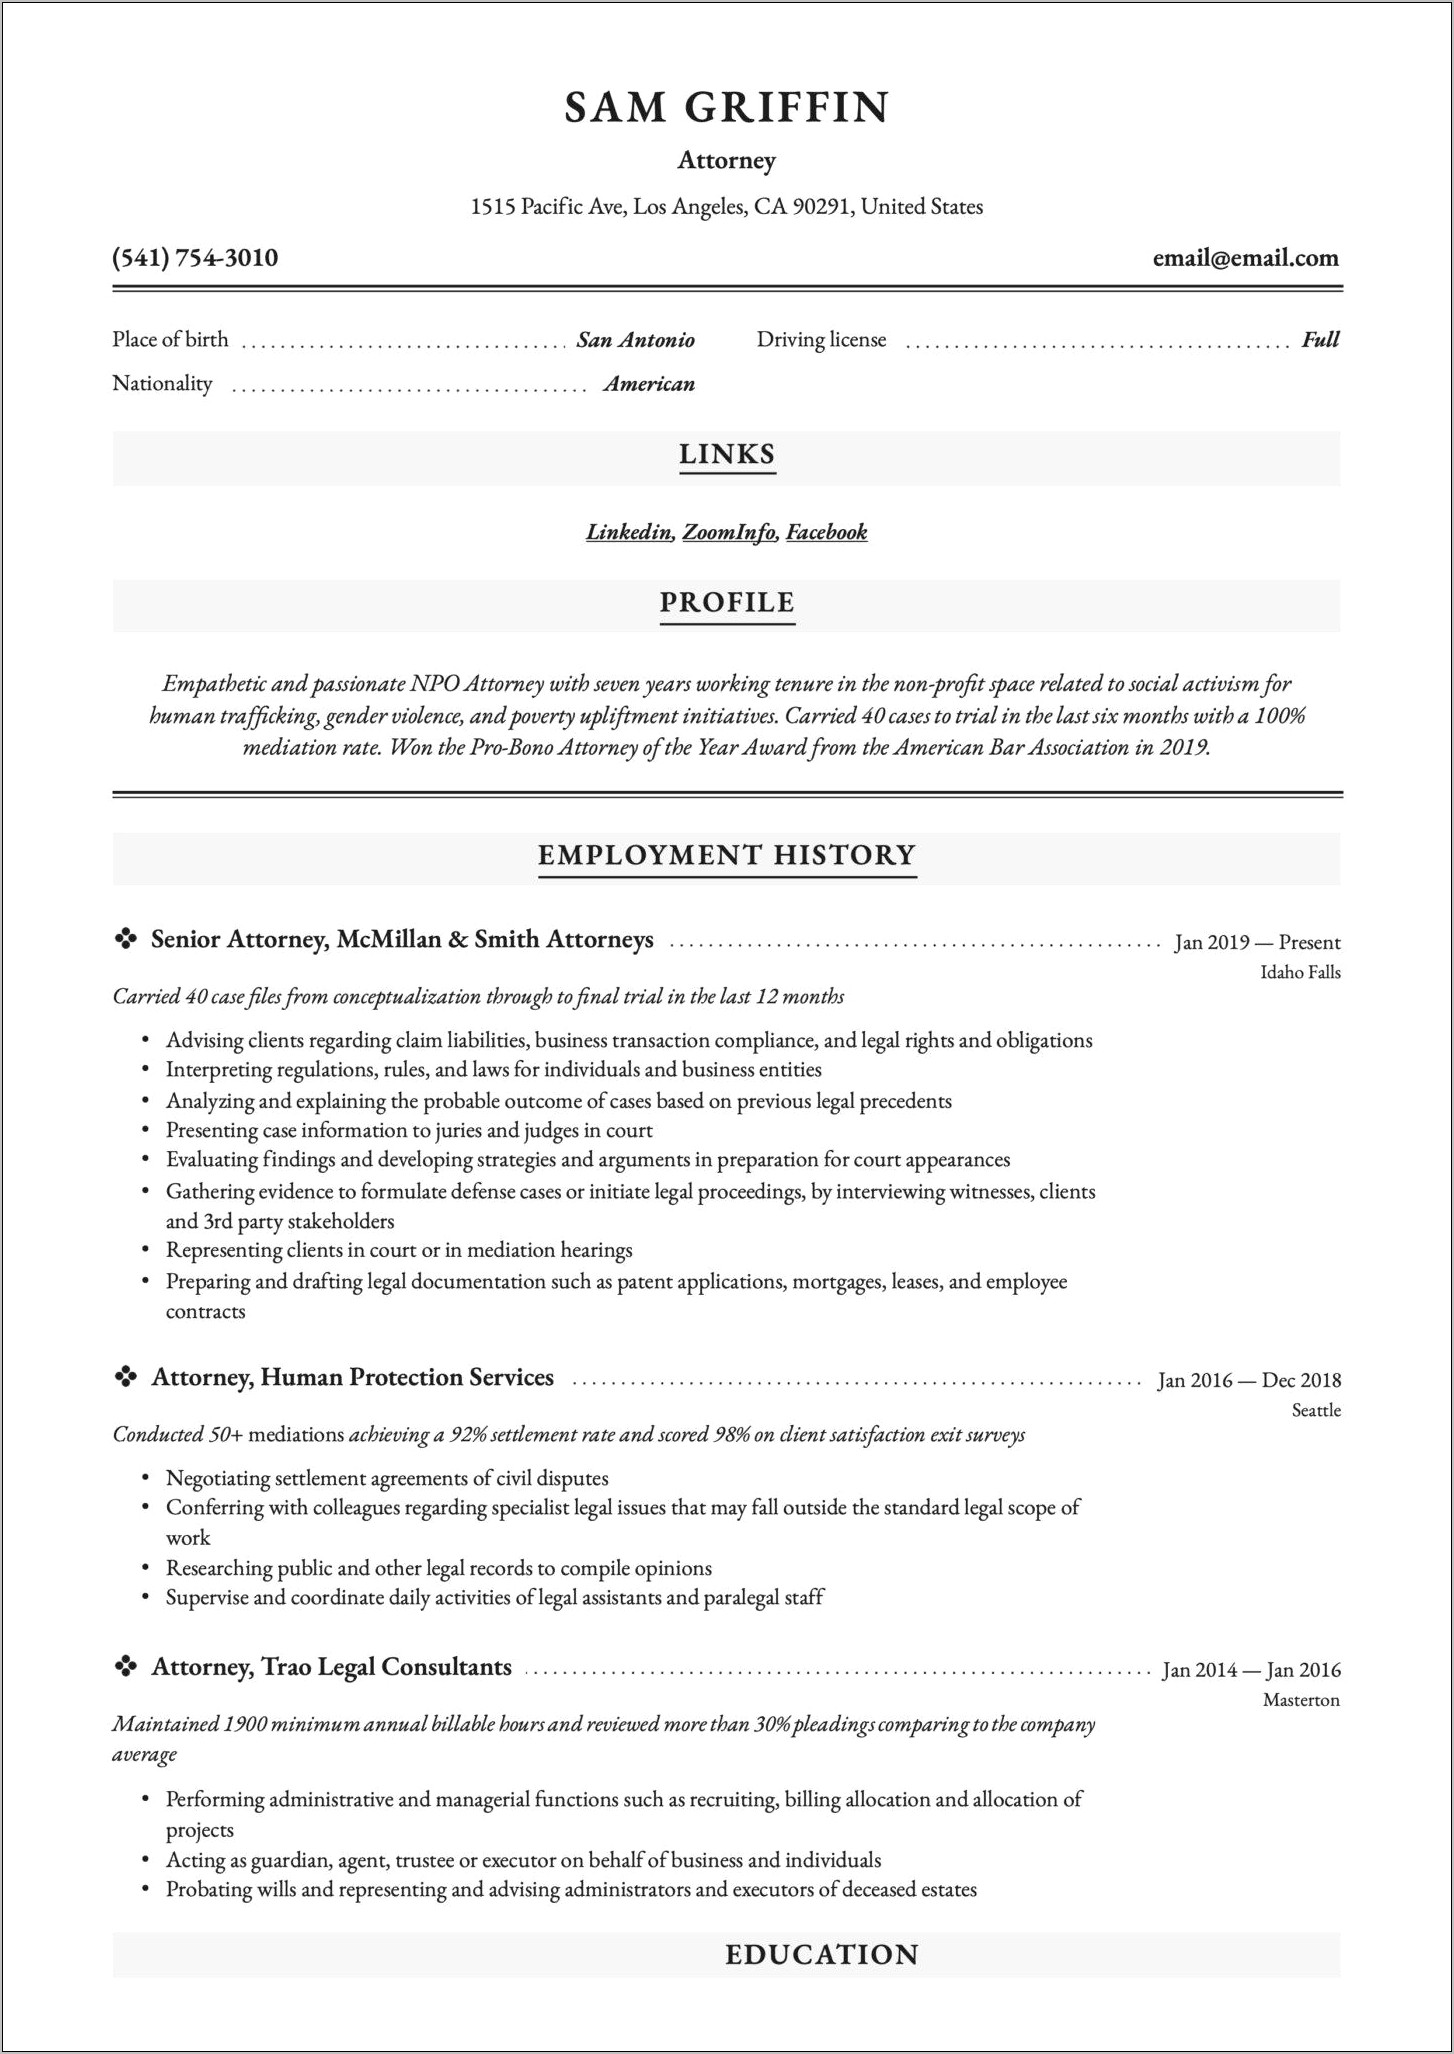 Attorney 4 Years After Law School Resume